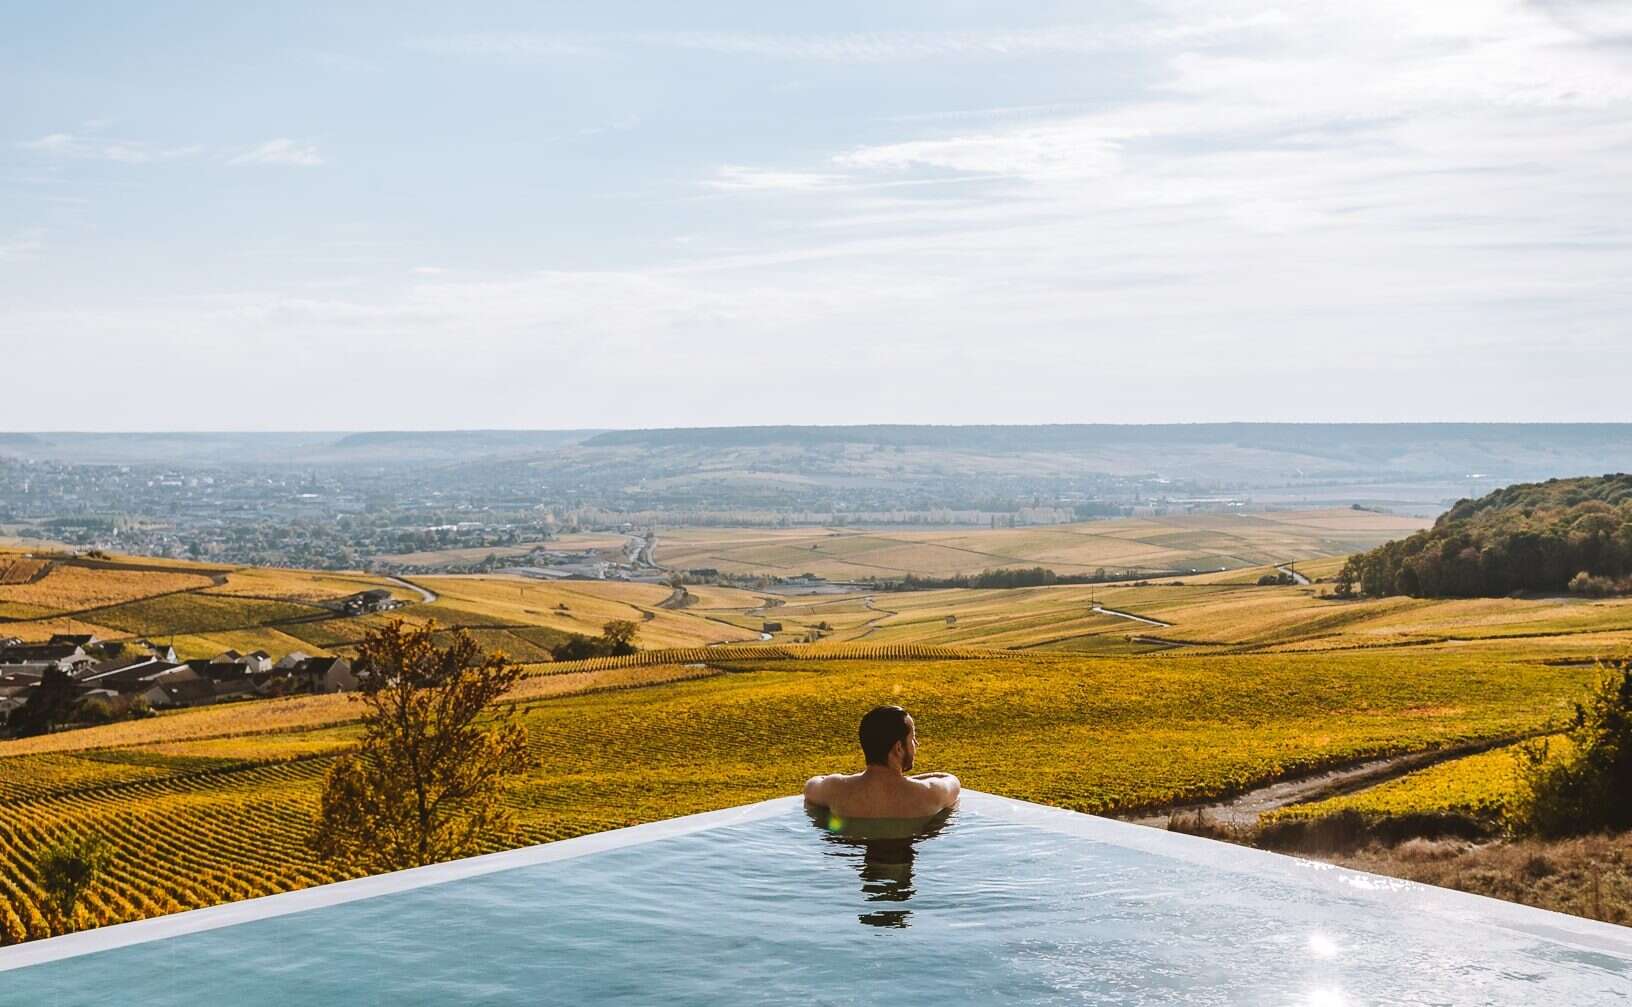 royal champagne hotel pool looking over vineyards